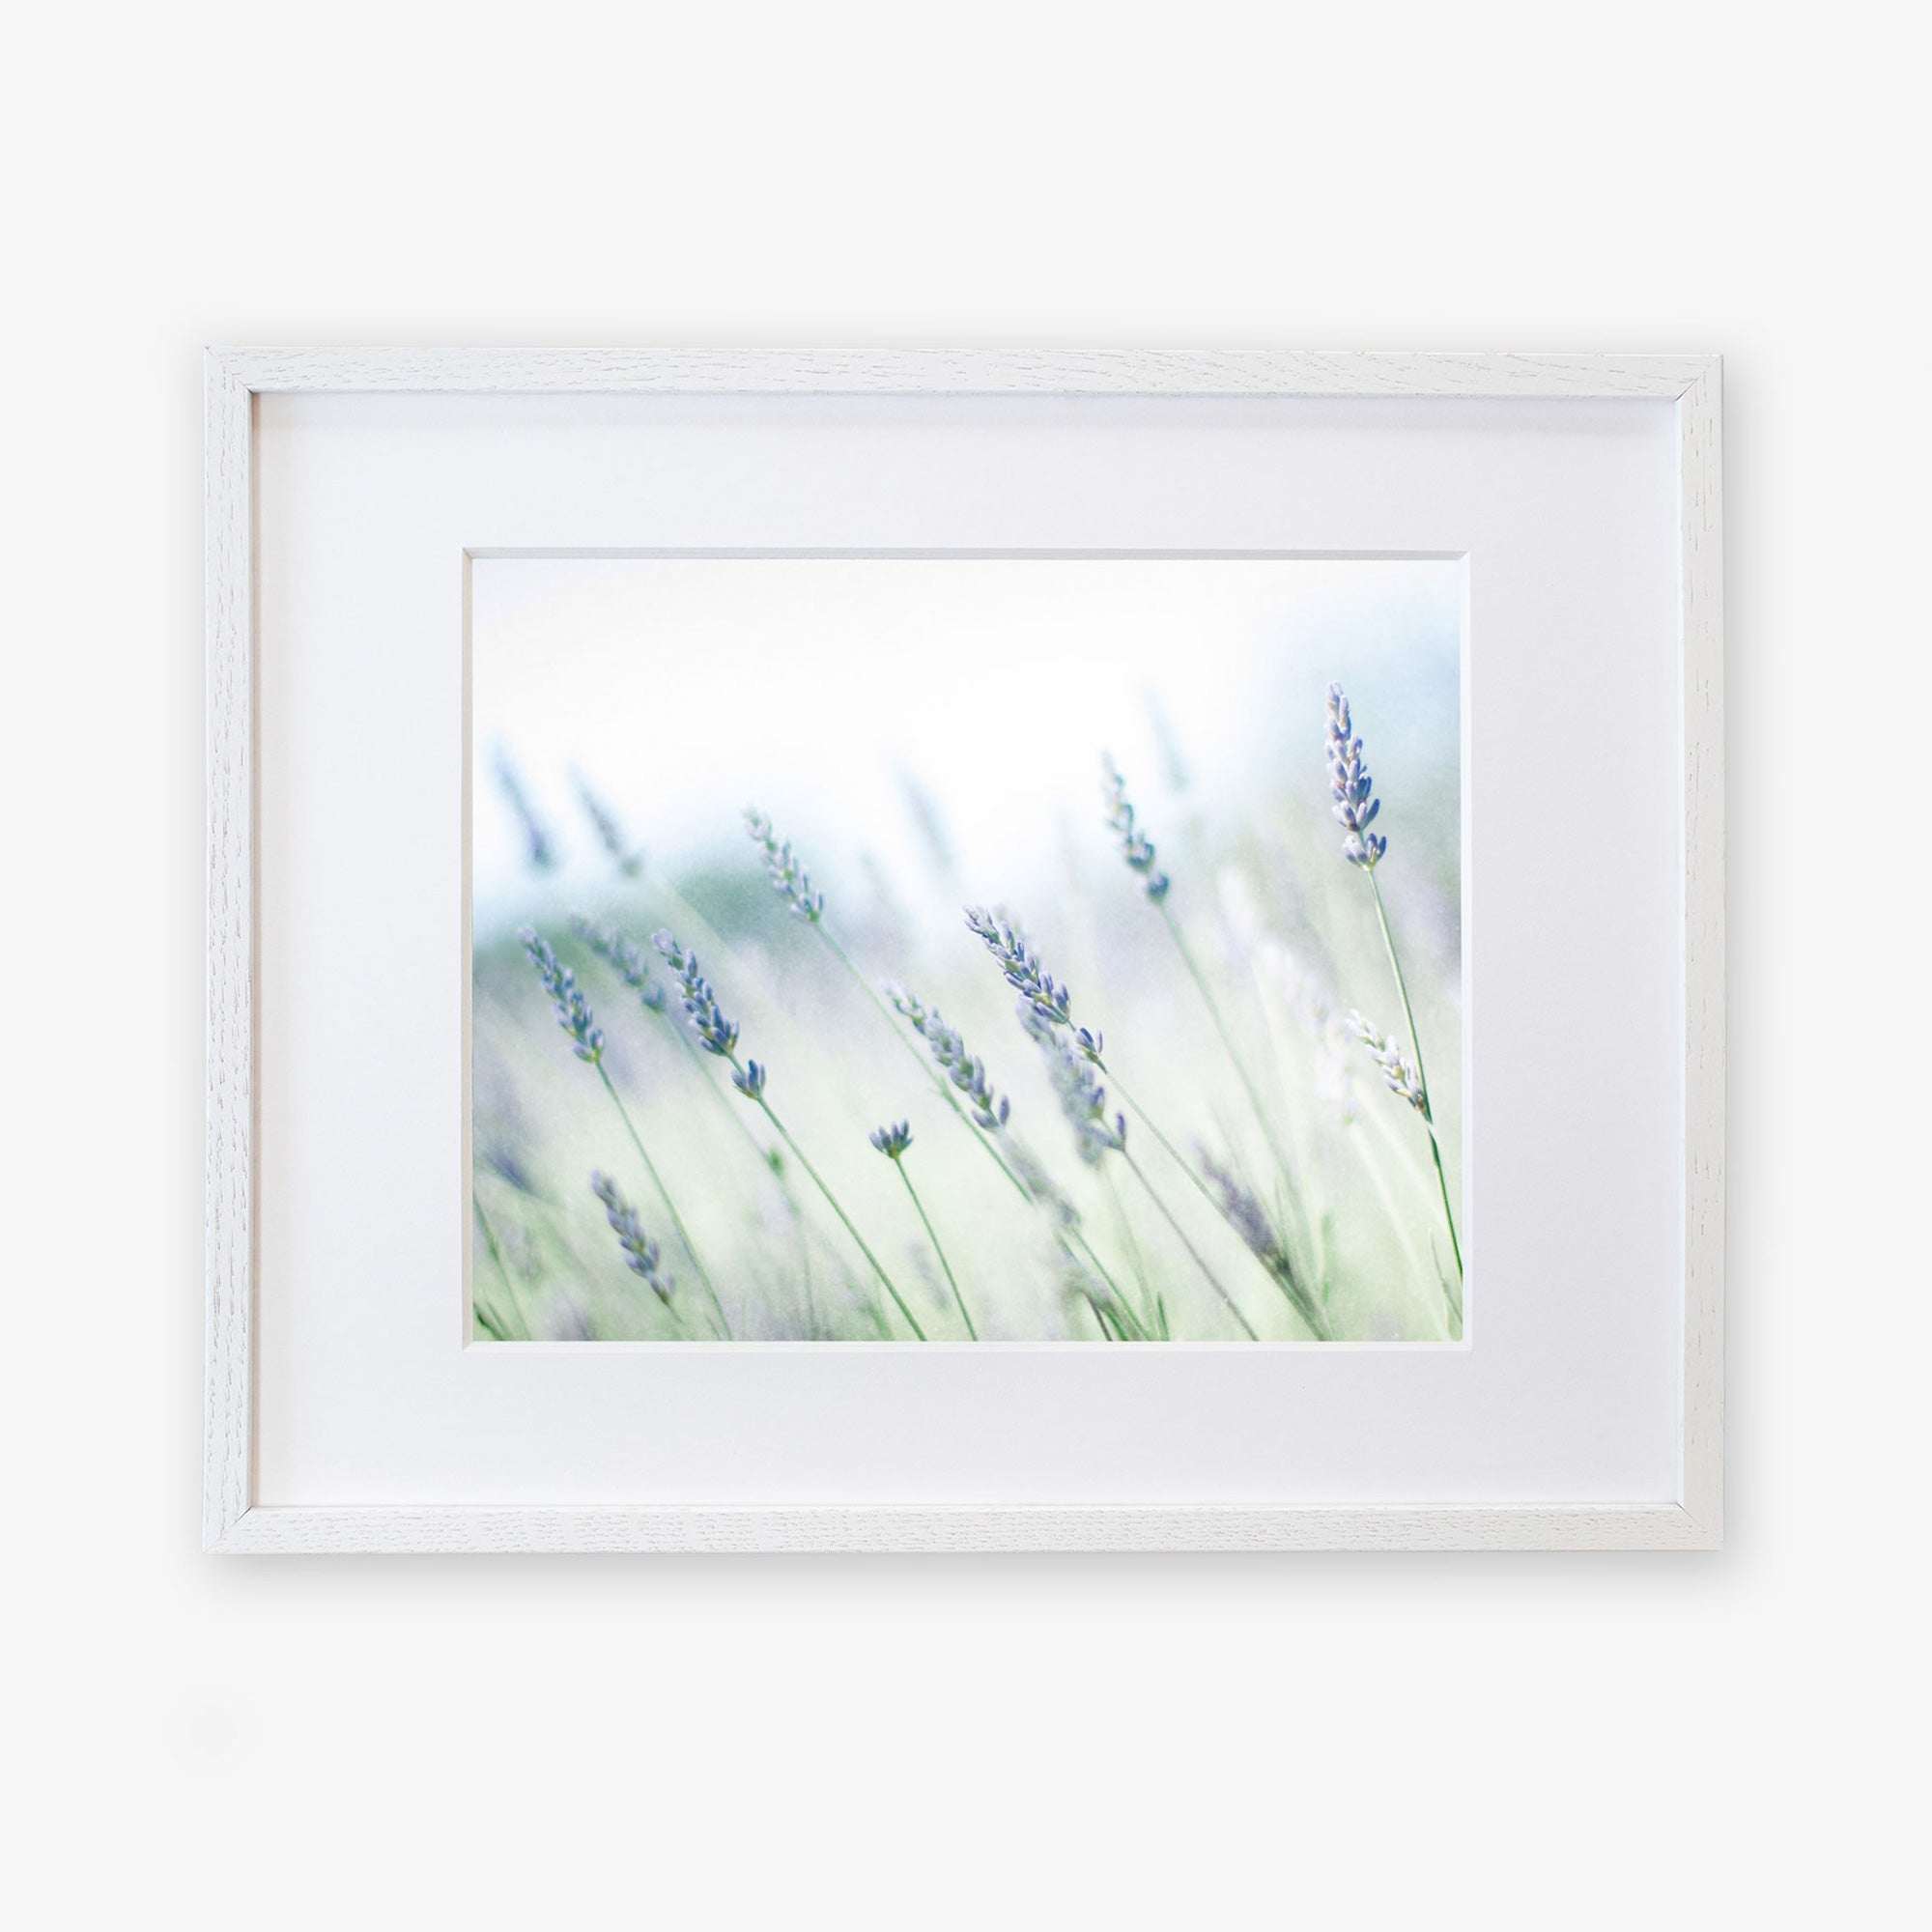 A framed photograph of delicate lavender flowers in a soft focus, with light tones and a hint of green foliage, printed on archival photographic paper, displayed in a simple white frame against a white background. This is the Rustic Farmhouse Floral Wall Art &#39;Buds of Lavender&#39; by Offley Green.